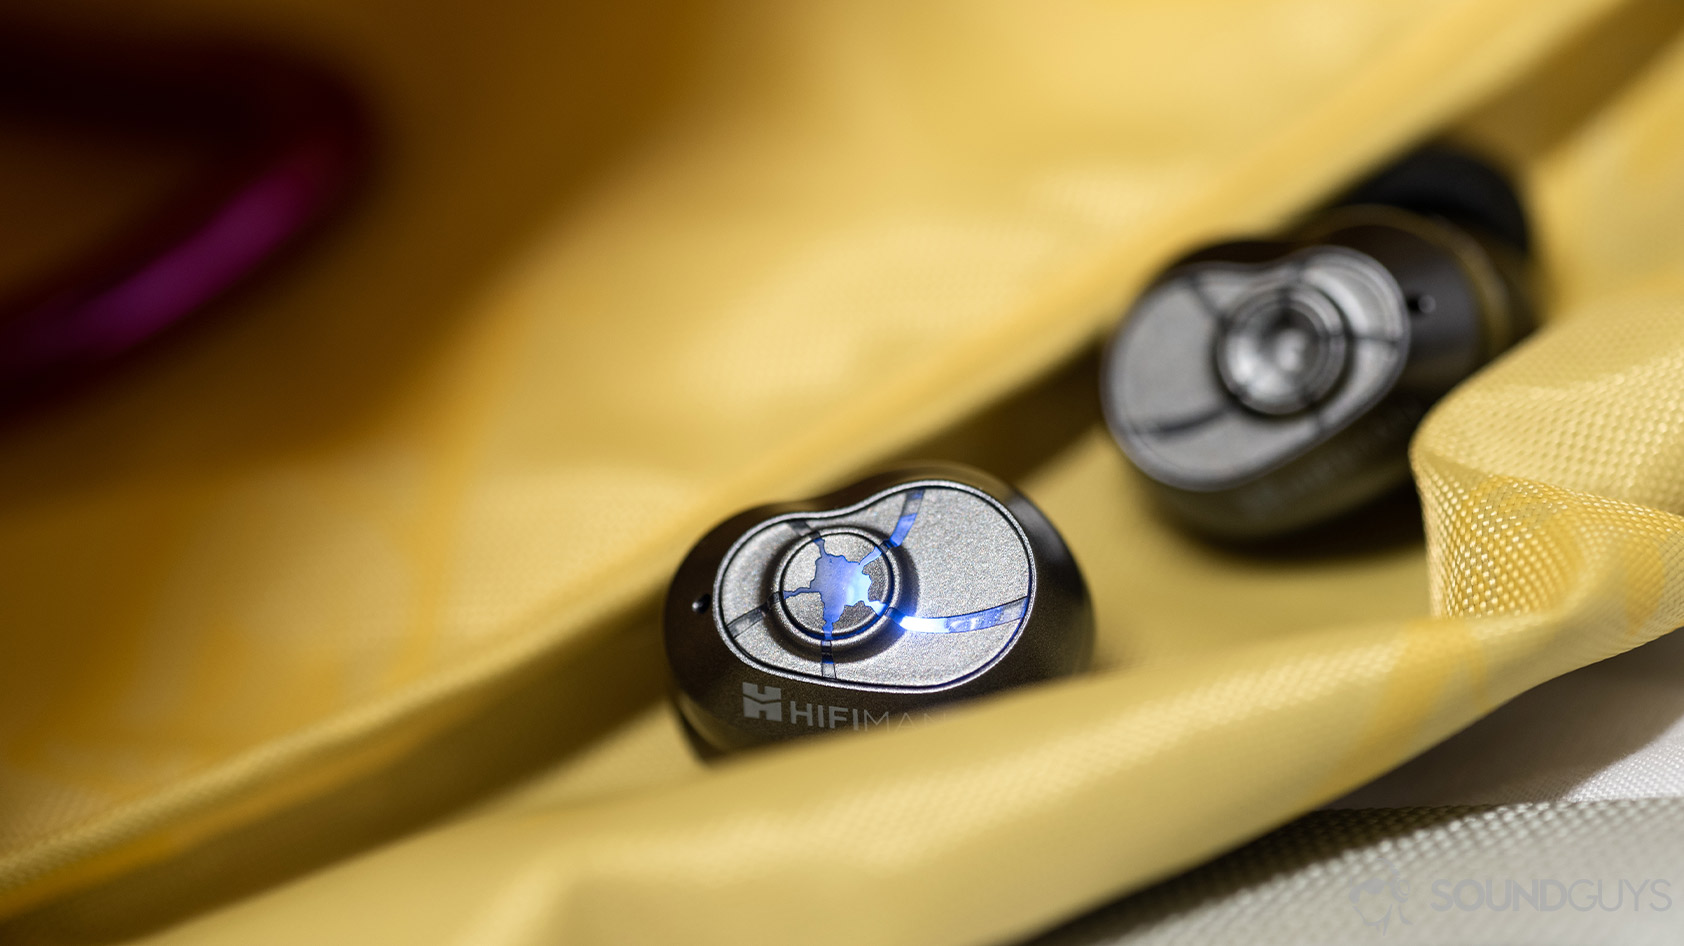 A close-up photo of the HiFiMan TWS600 true wireless earbuds on a yellow nylon surface.